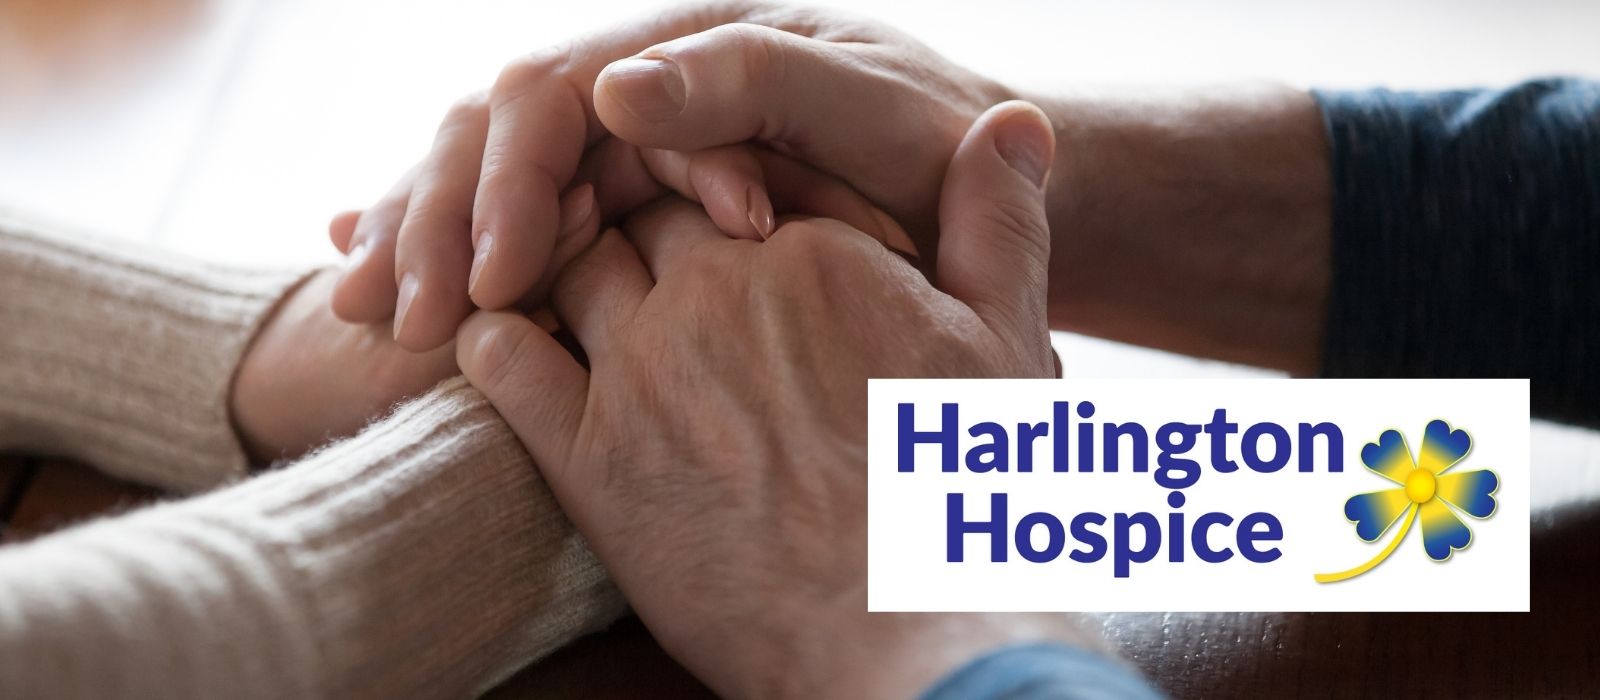 Here’s Why We Should All Support Harlington Hospice